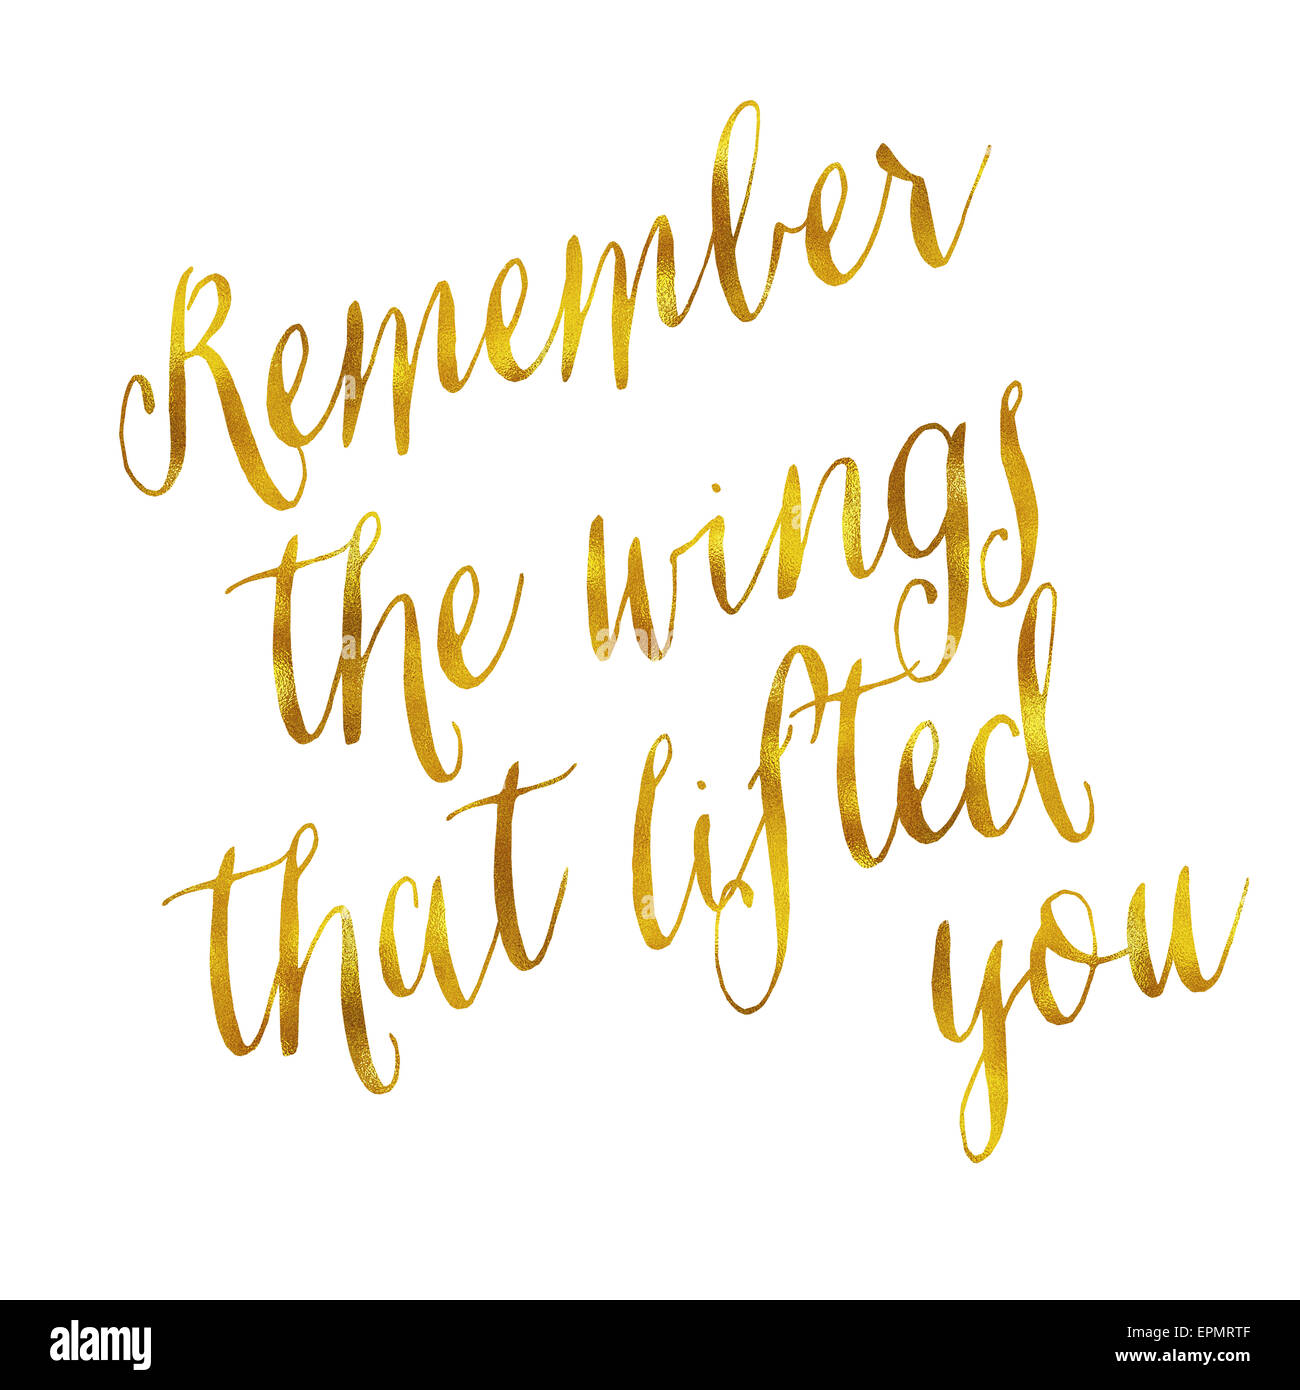 Remember The Wings That Lifted You Gold Faux Foil Metallic Glitter Quote Isolated on White Background Stock Photo